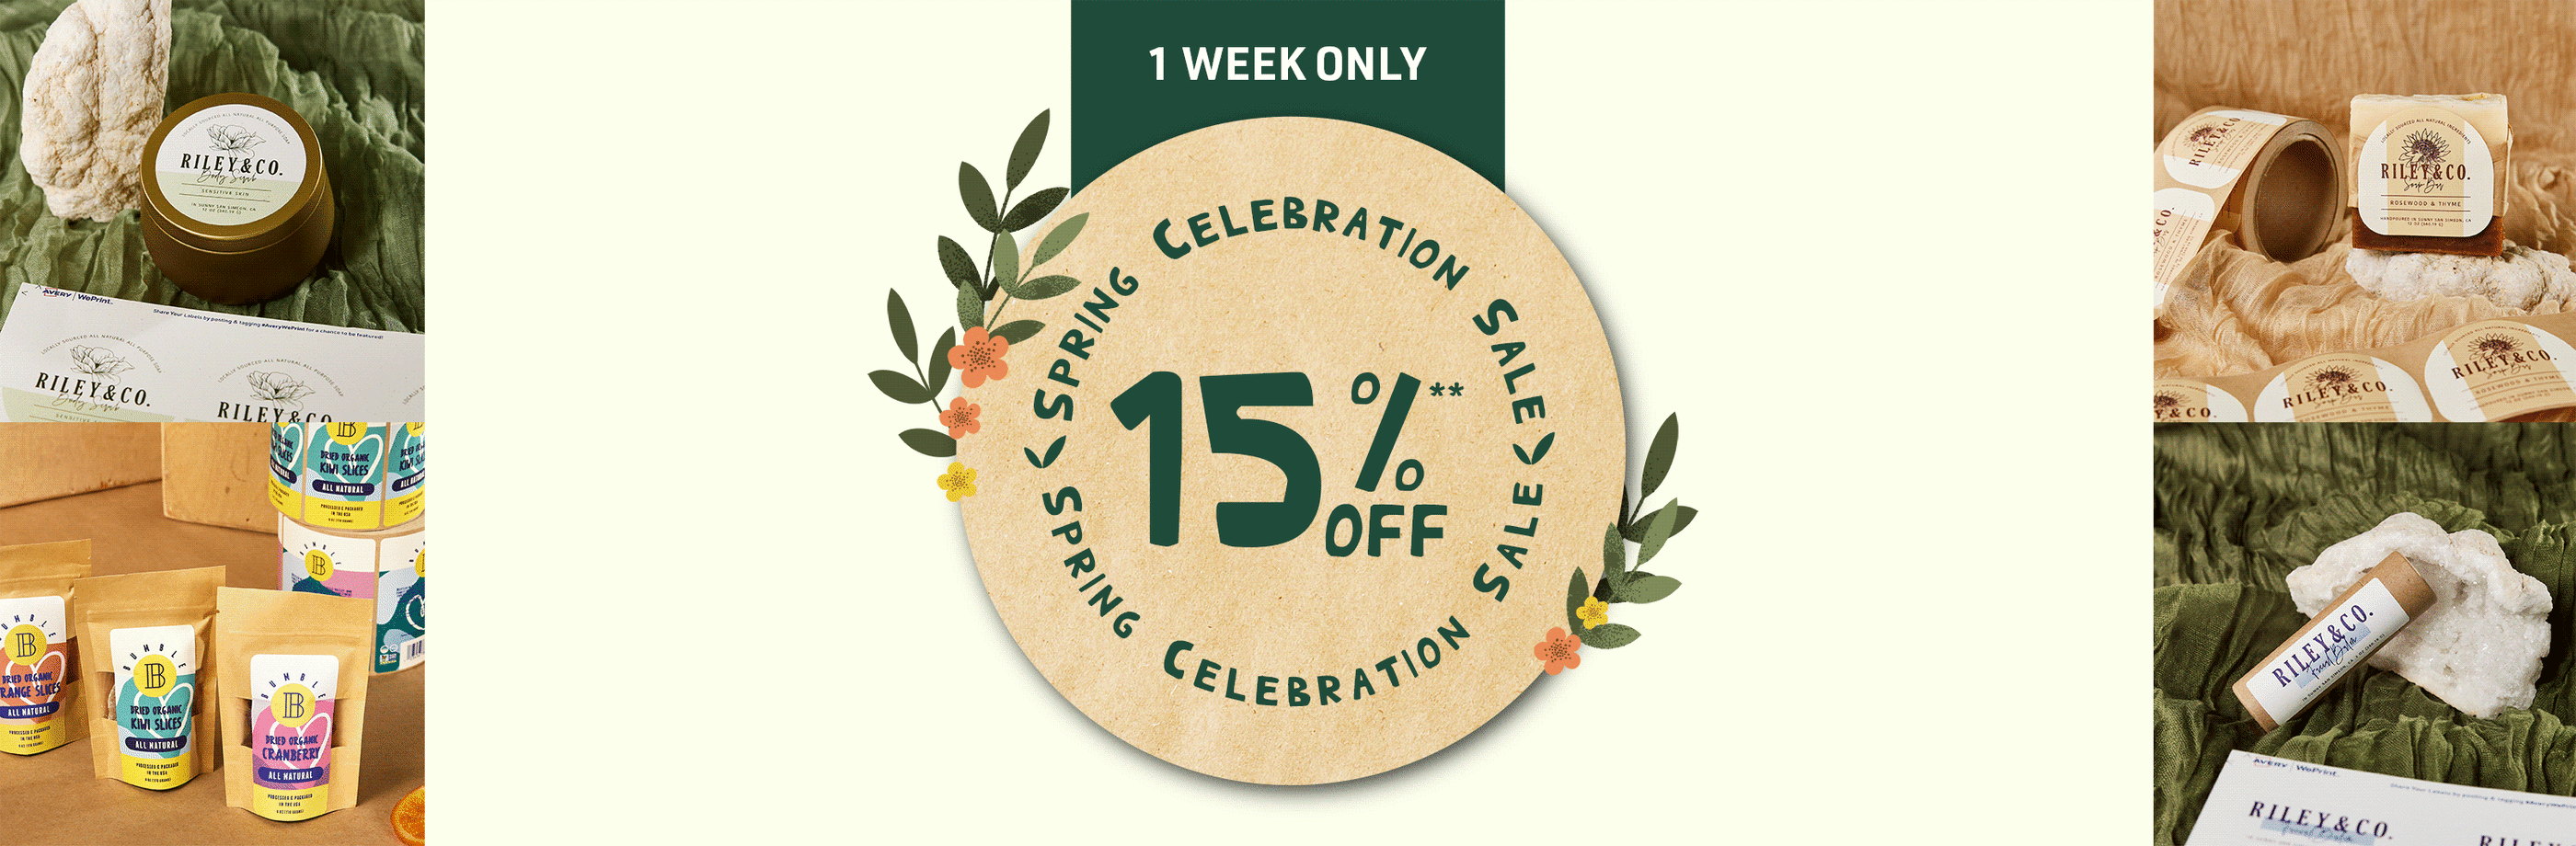 15% off Avery Label Spring Celebration Sale** | Avery Products